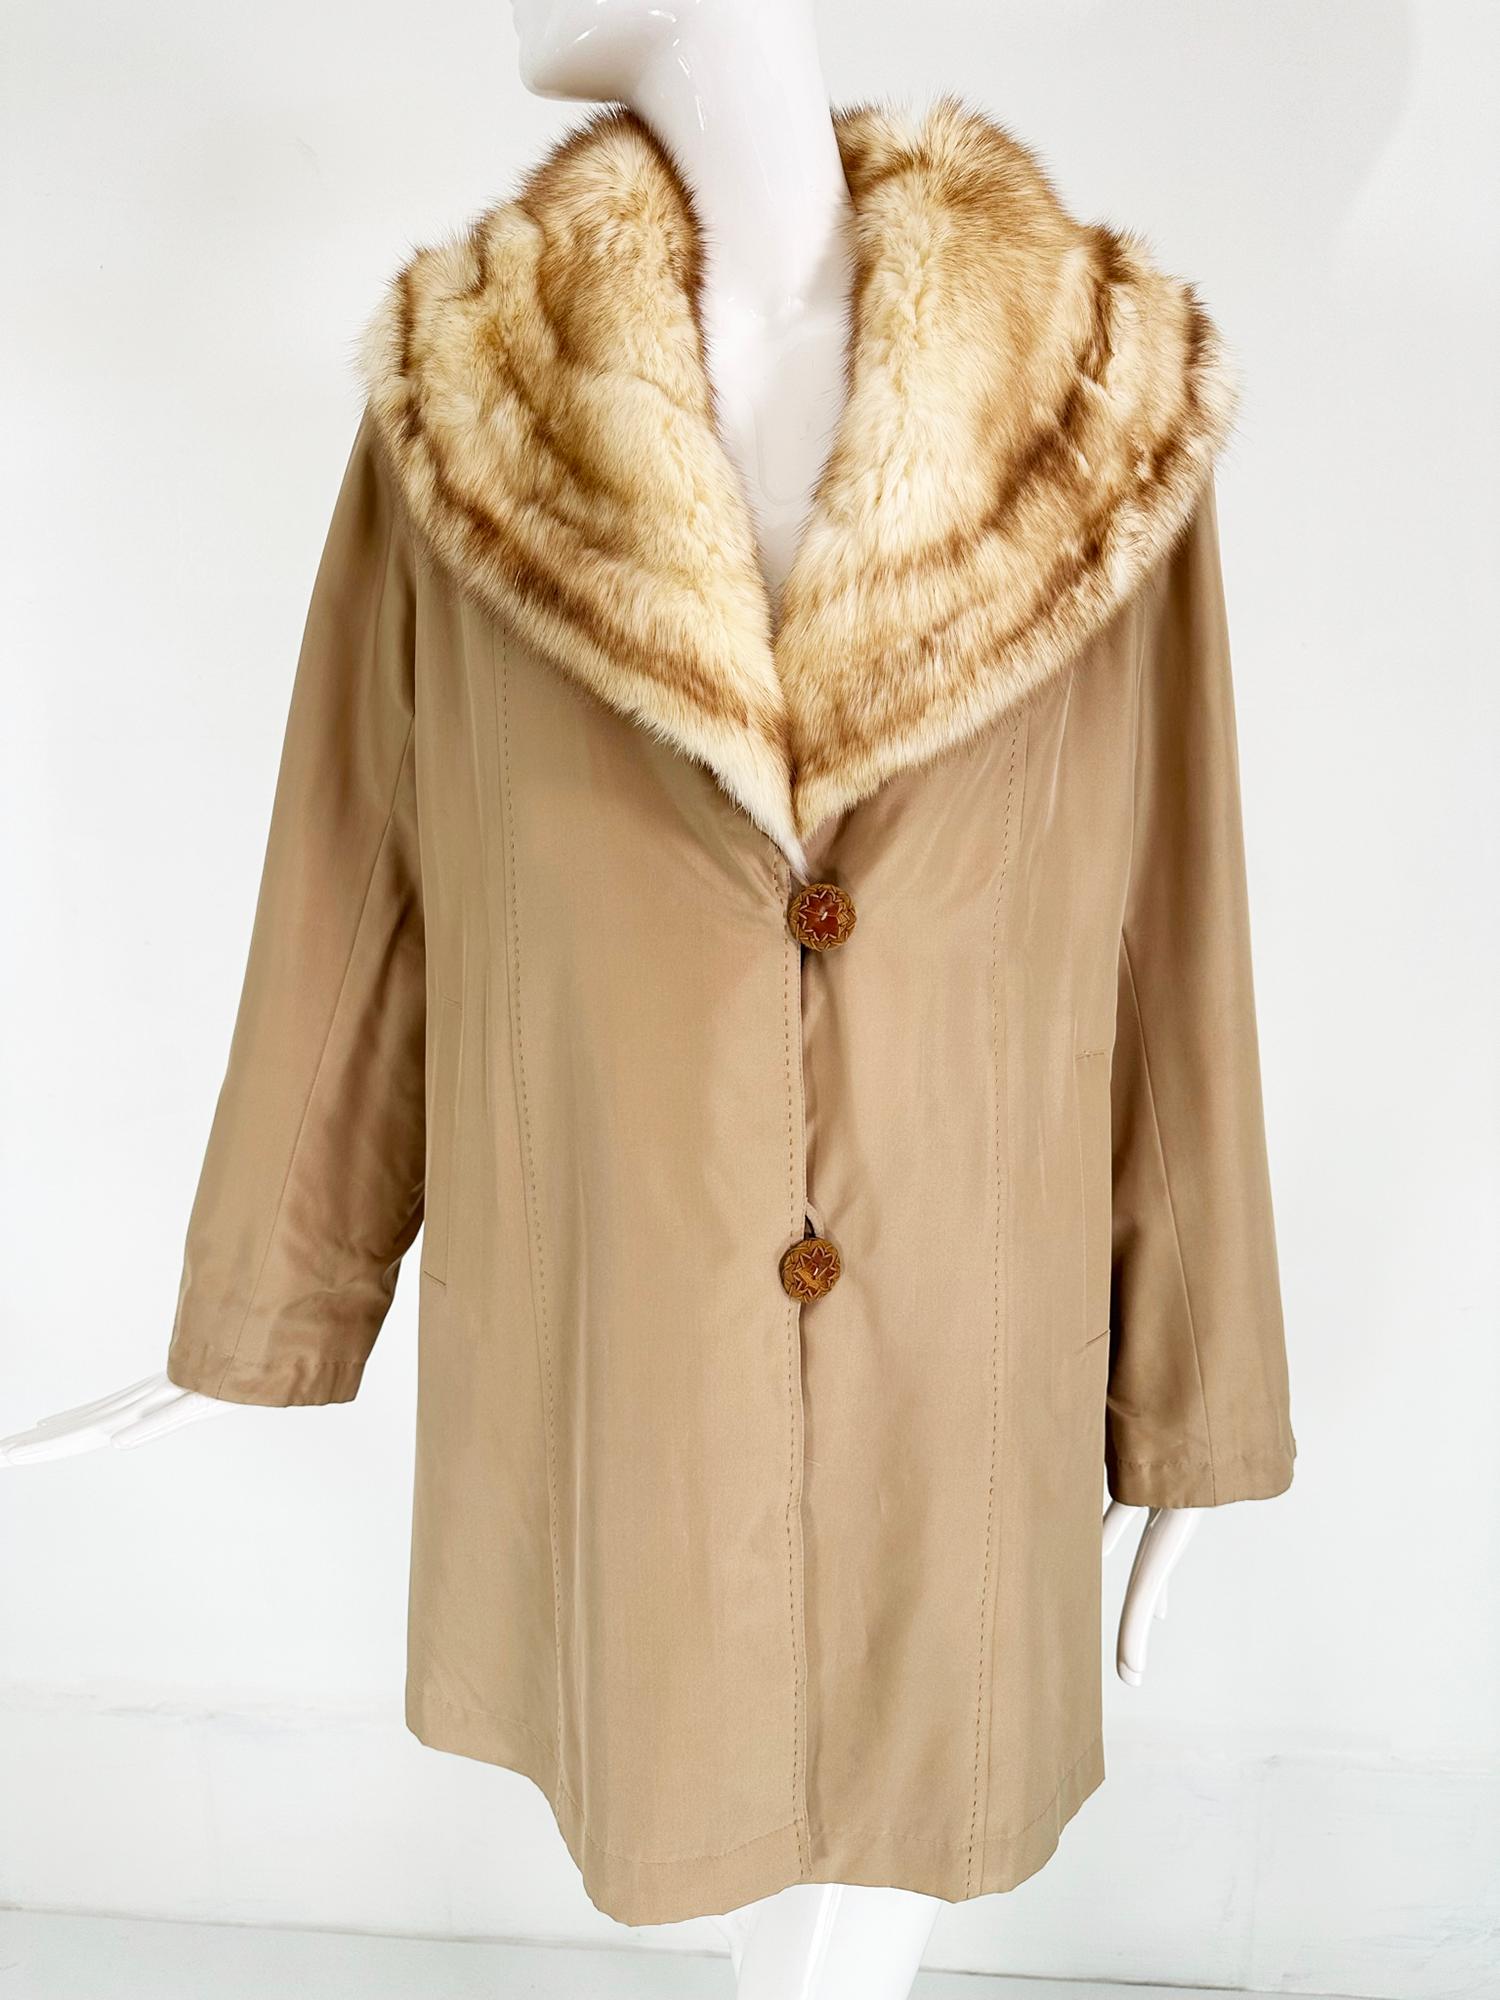 Champagne Blond Sheared Mink Reversible Jacket With Full Shawl Collar  For Sale 8